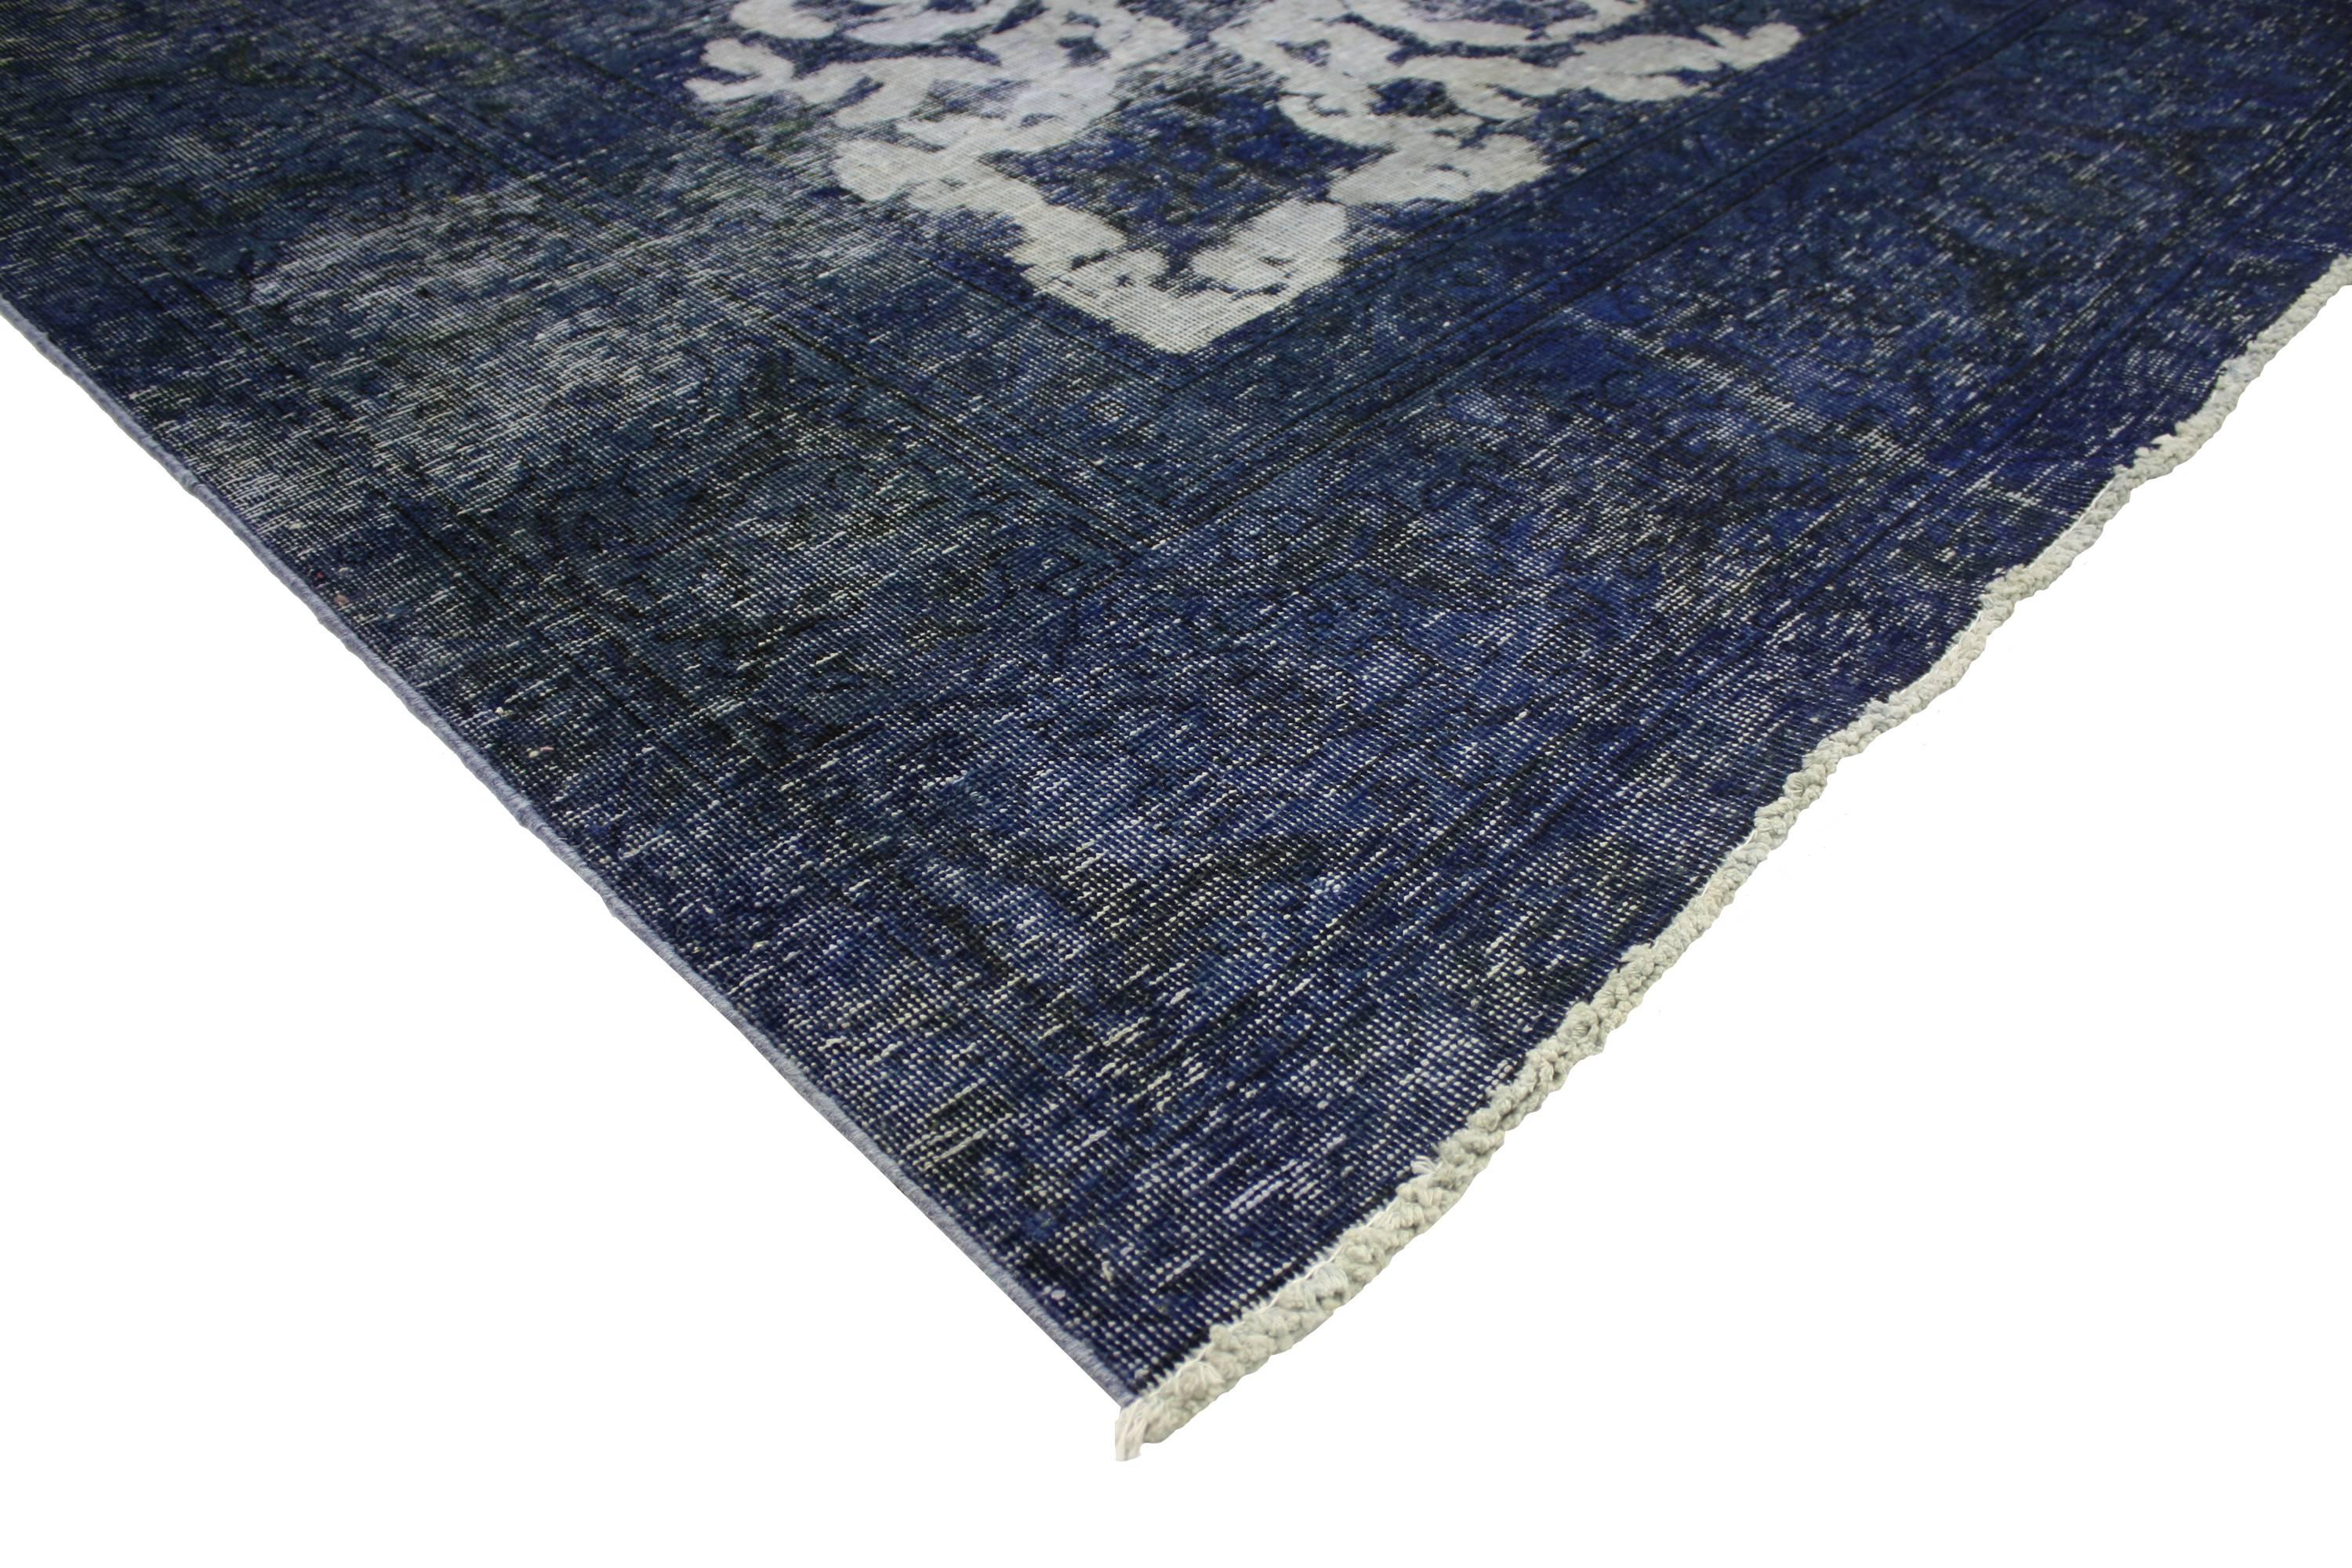 80233 Distressed Overdyed Blue Vintage Persian Rug with Modern Industrial Style. This beautifully composed distressed vintage Persian rug overdyed in blue features a modern Industrial style. Deeply saturated with variegated shades of blue bring a